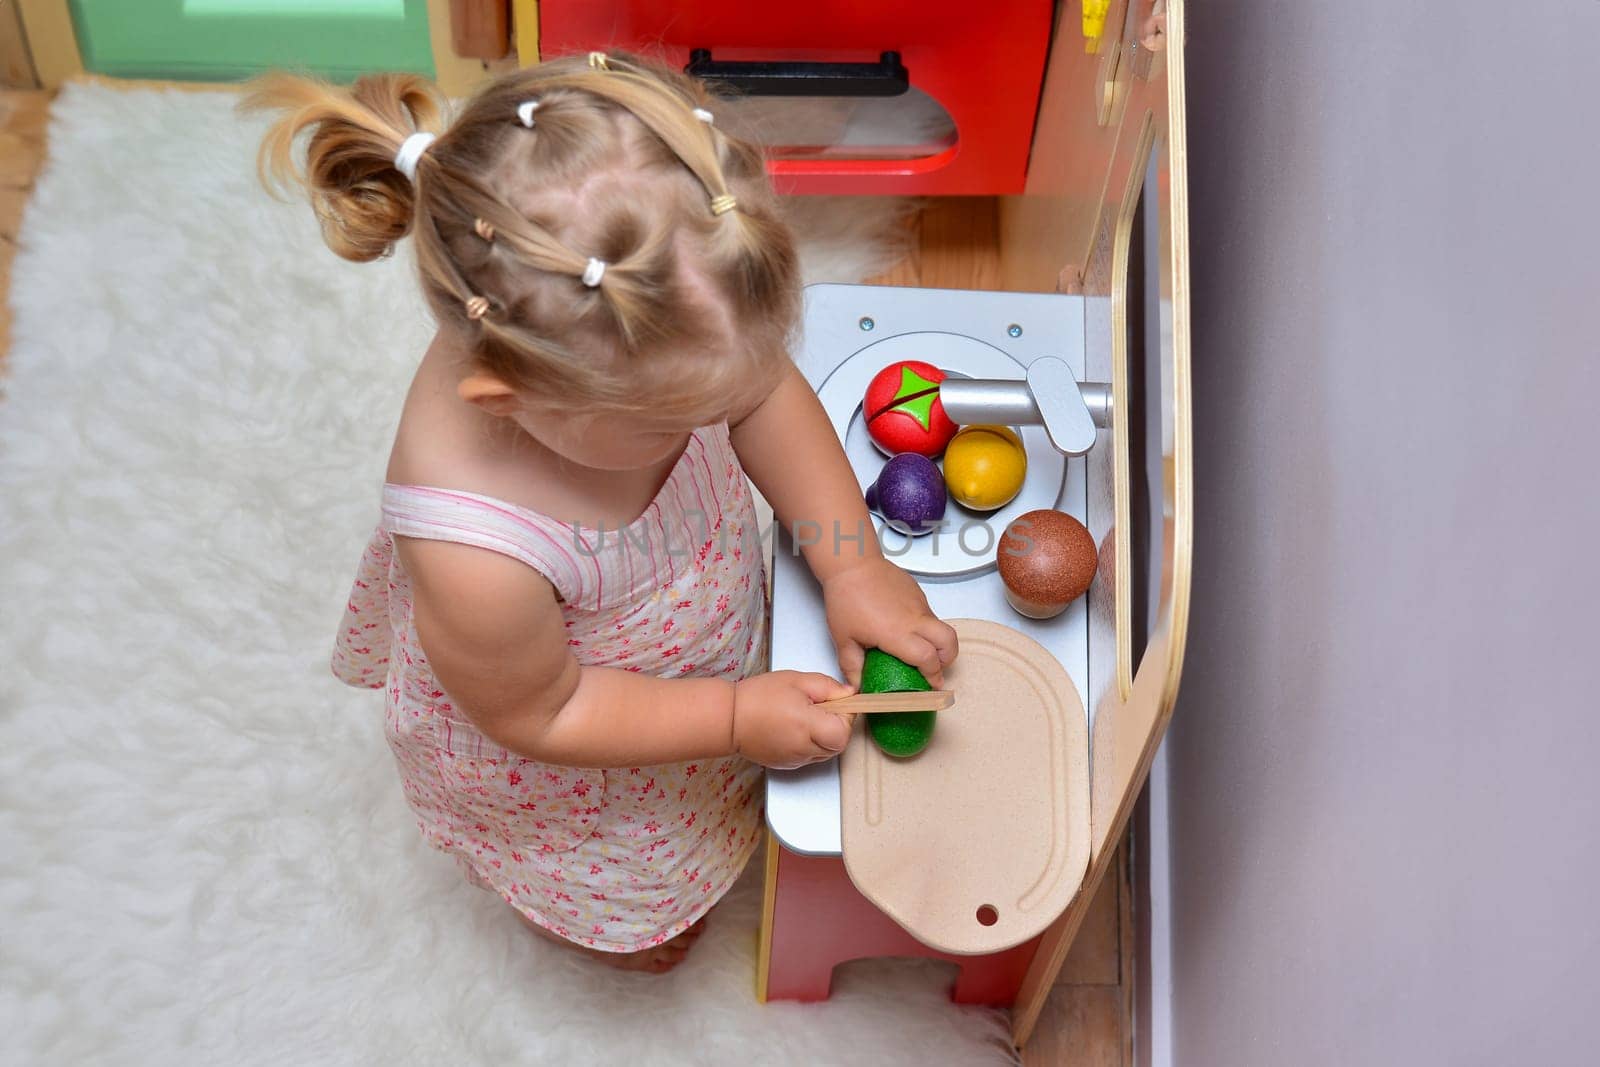 Girl cuts wooden vegetables on toy kitchen wooden cooking toy.